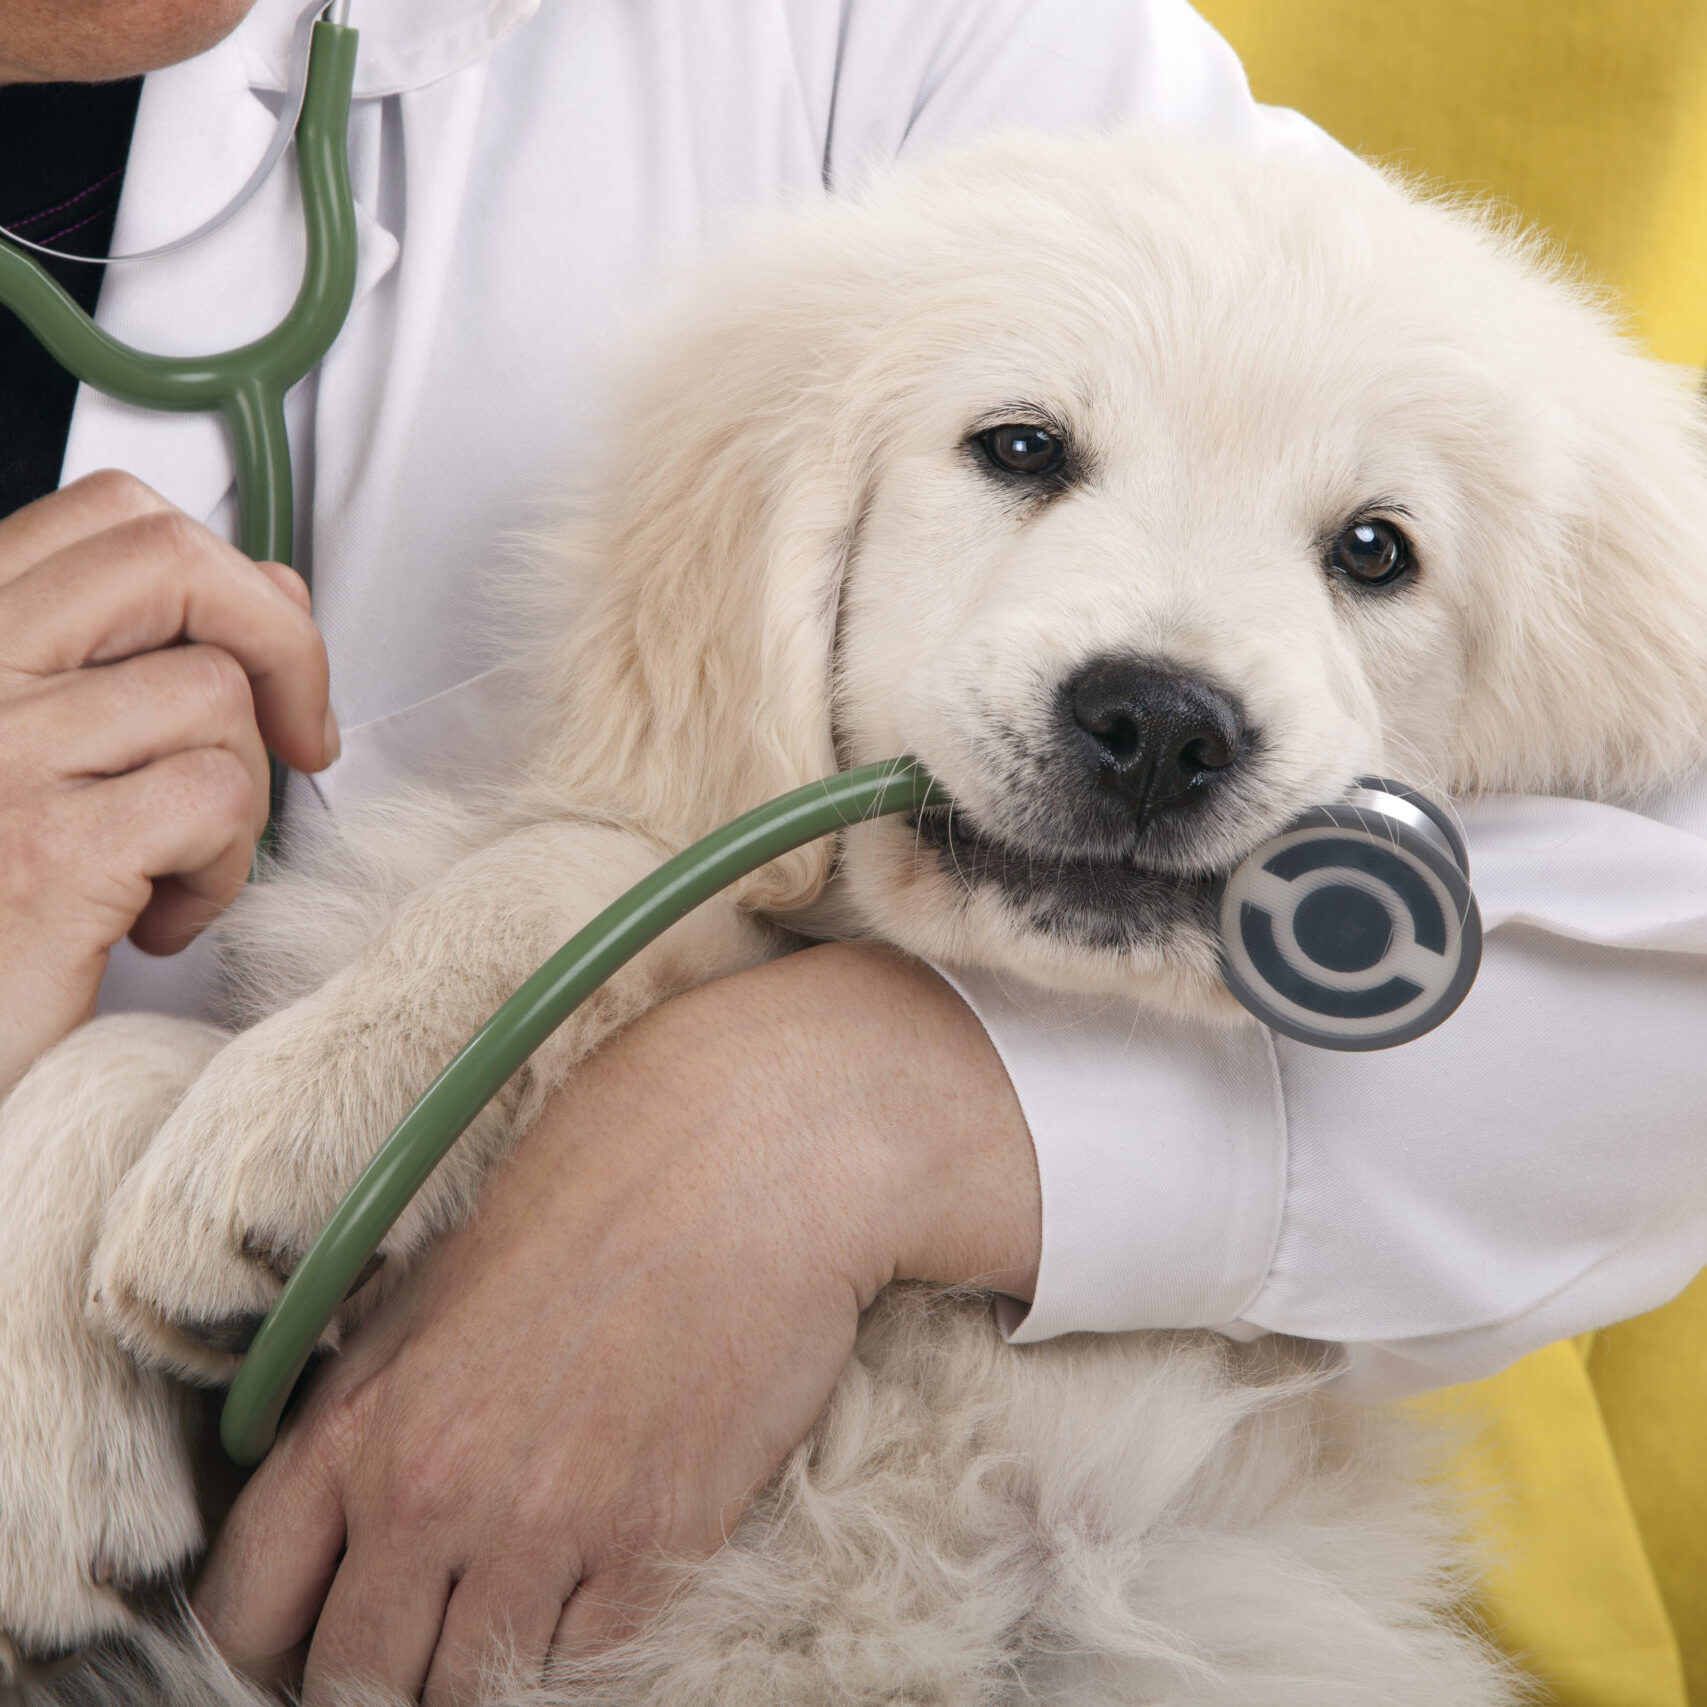 pupping being held by a veterinarian